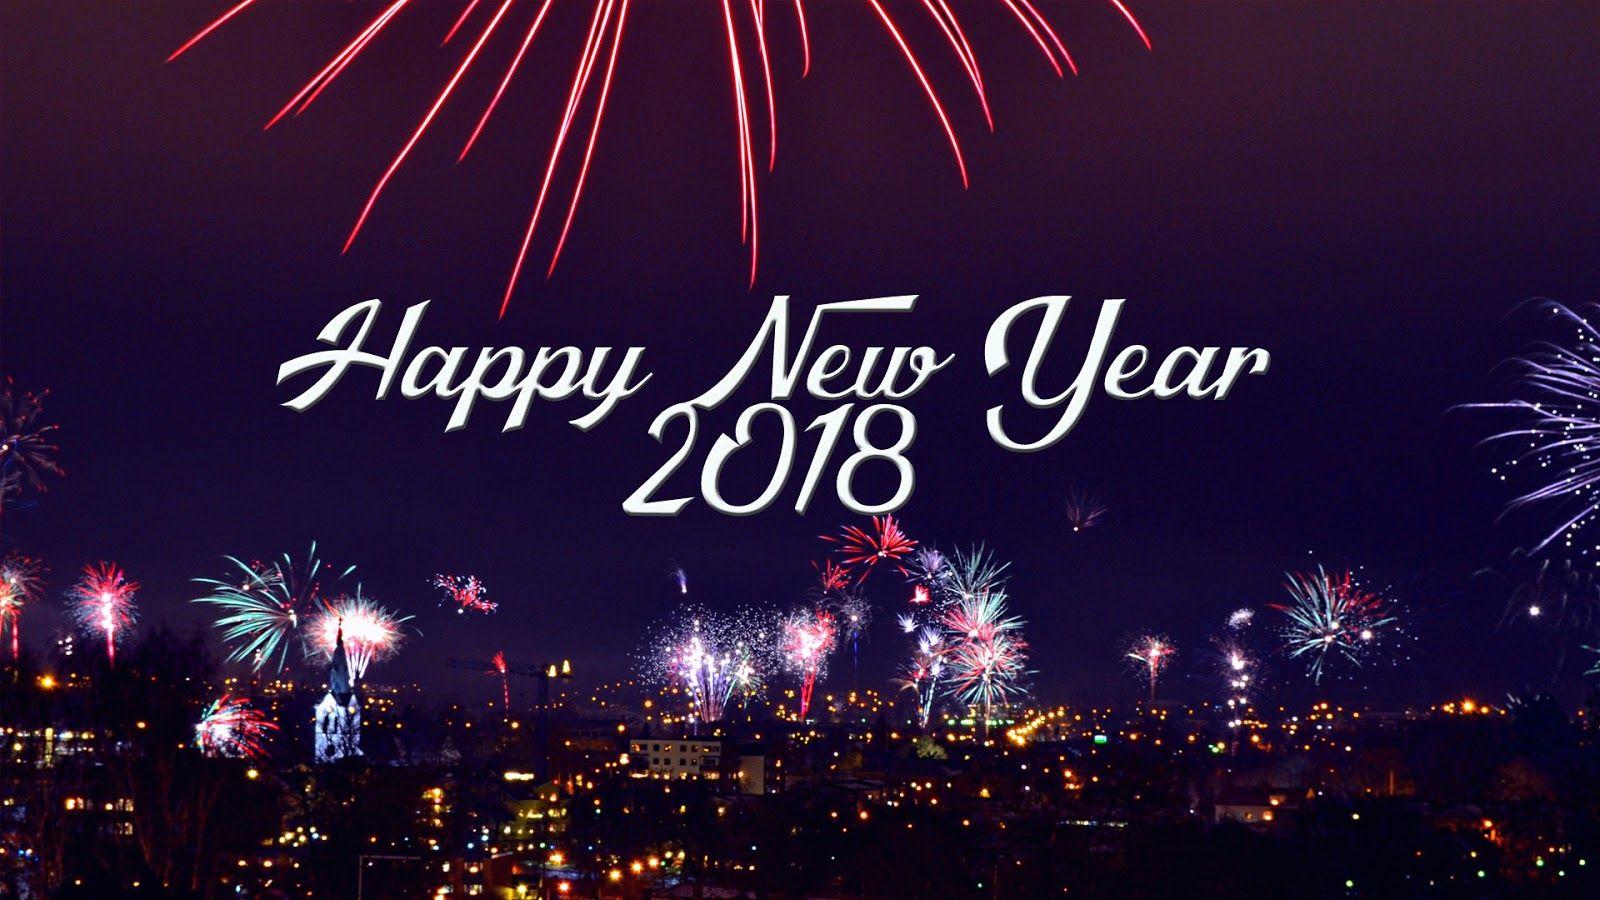 Happy New Year 2018 Wishes & Quotes HD & Wallpaper